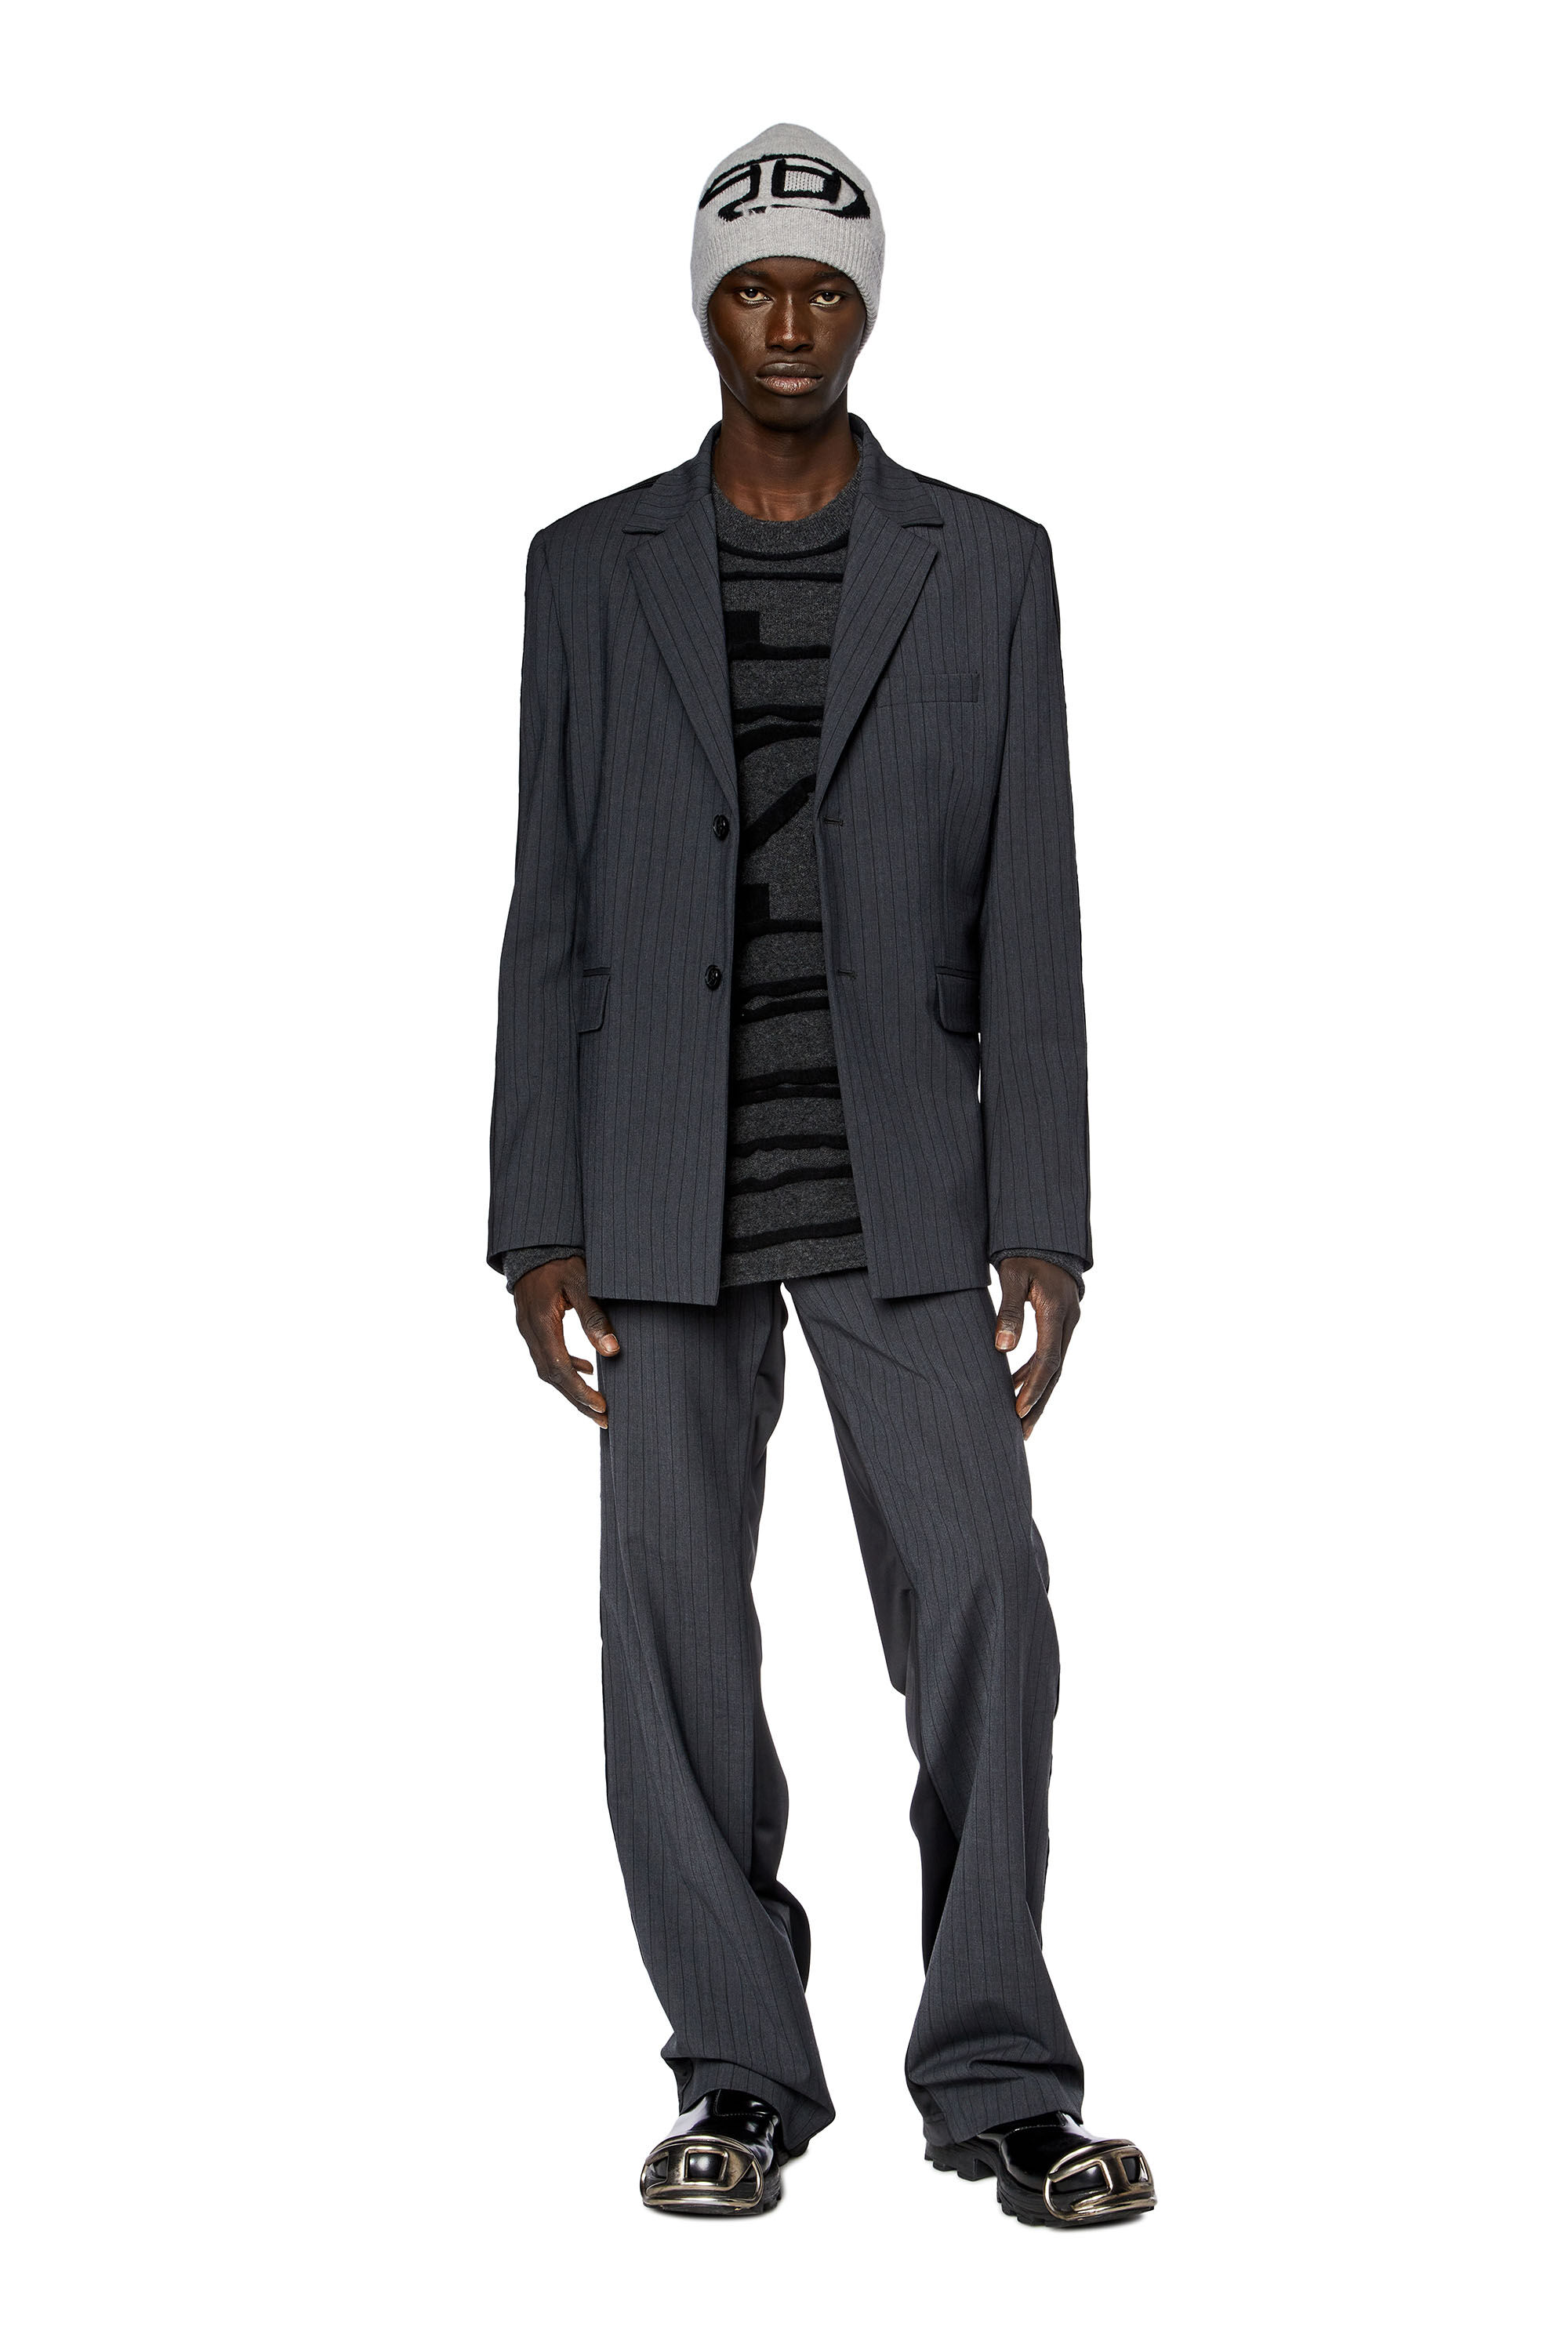 Diesel - J-WIRE, Man Blazer in pinstriped cool wool and jersey in Grey - Image 1